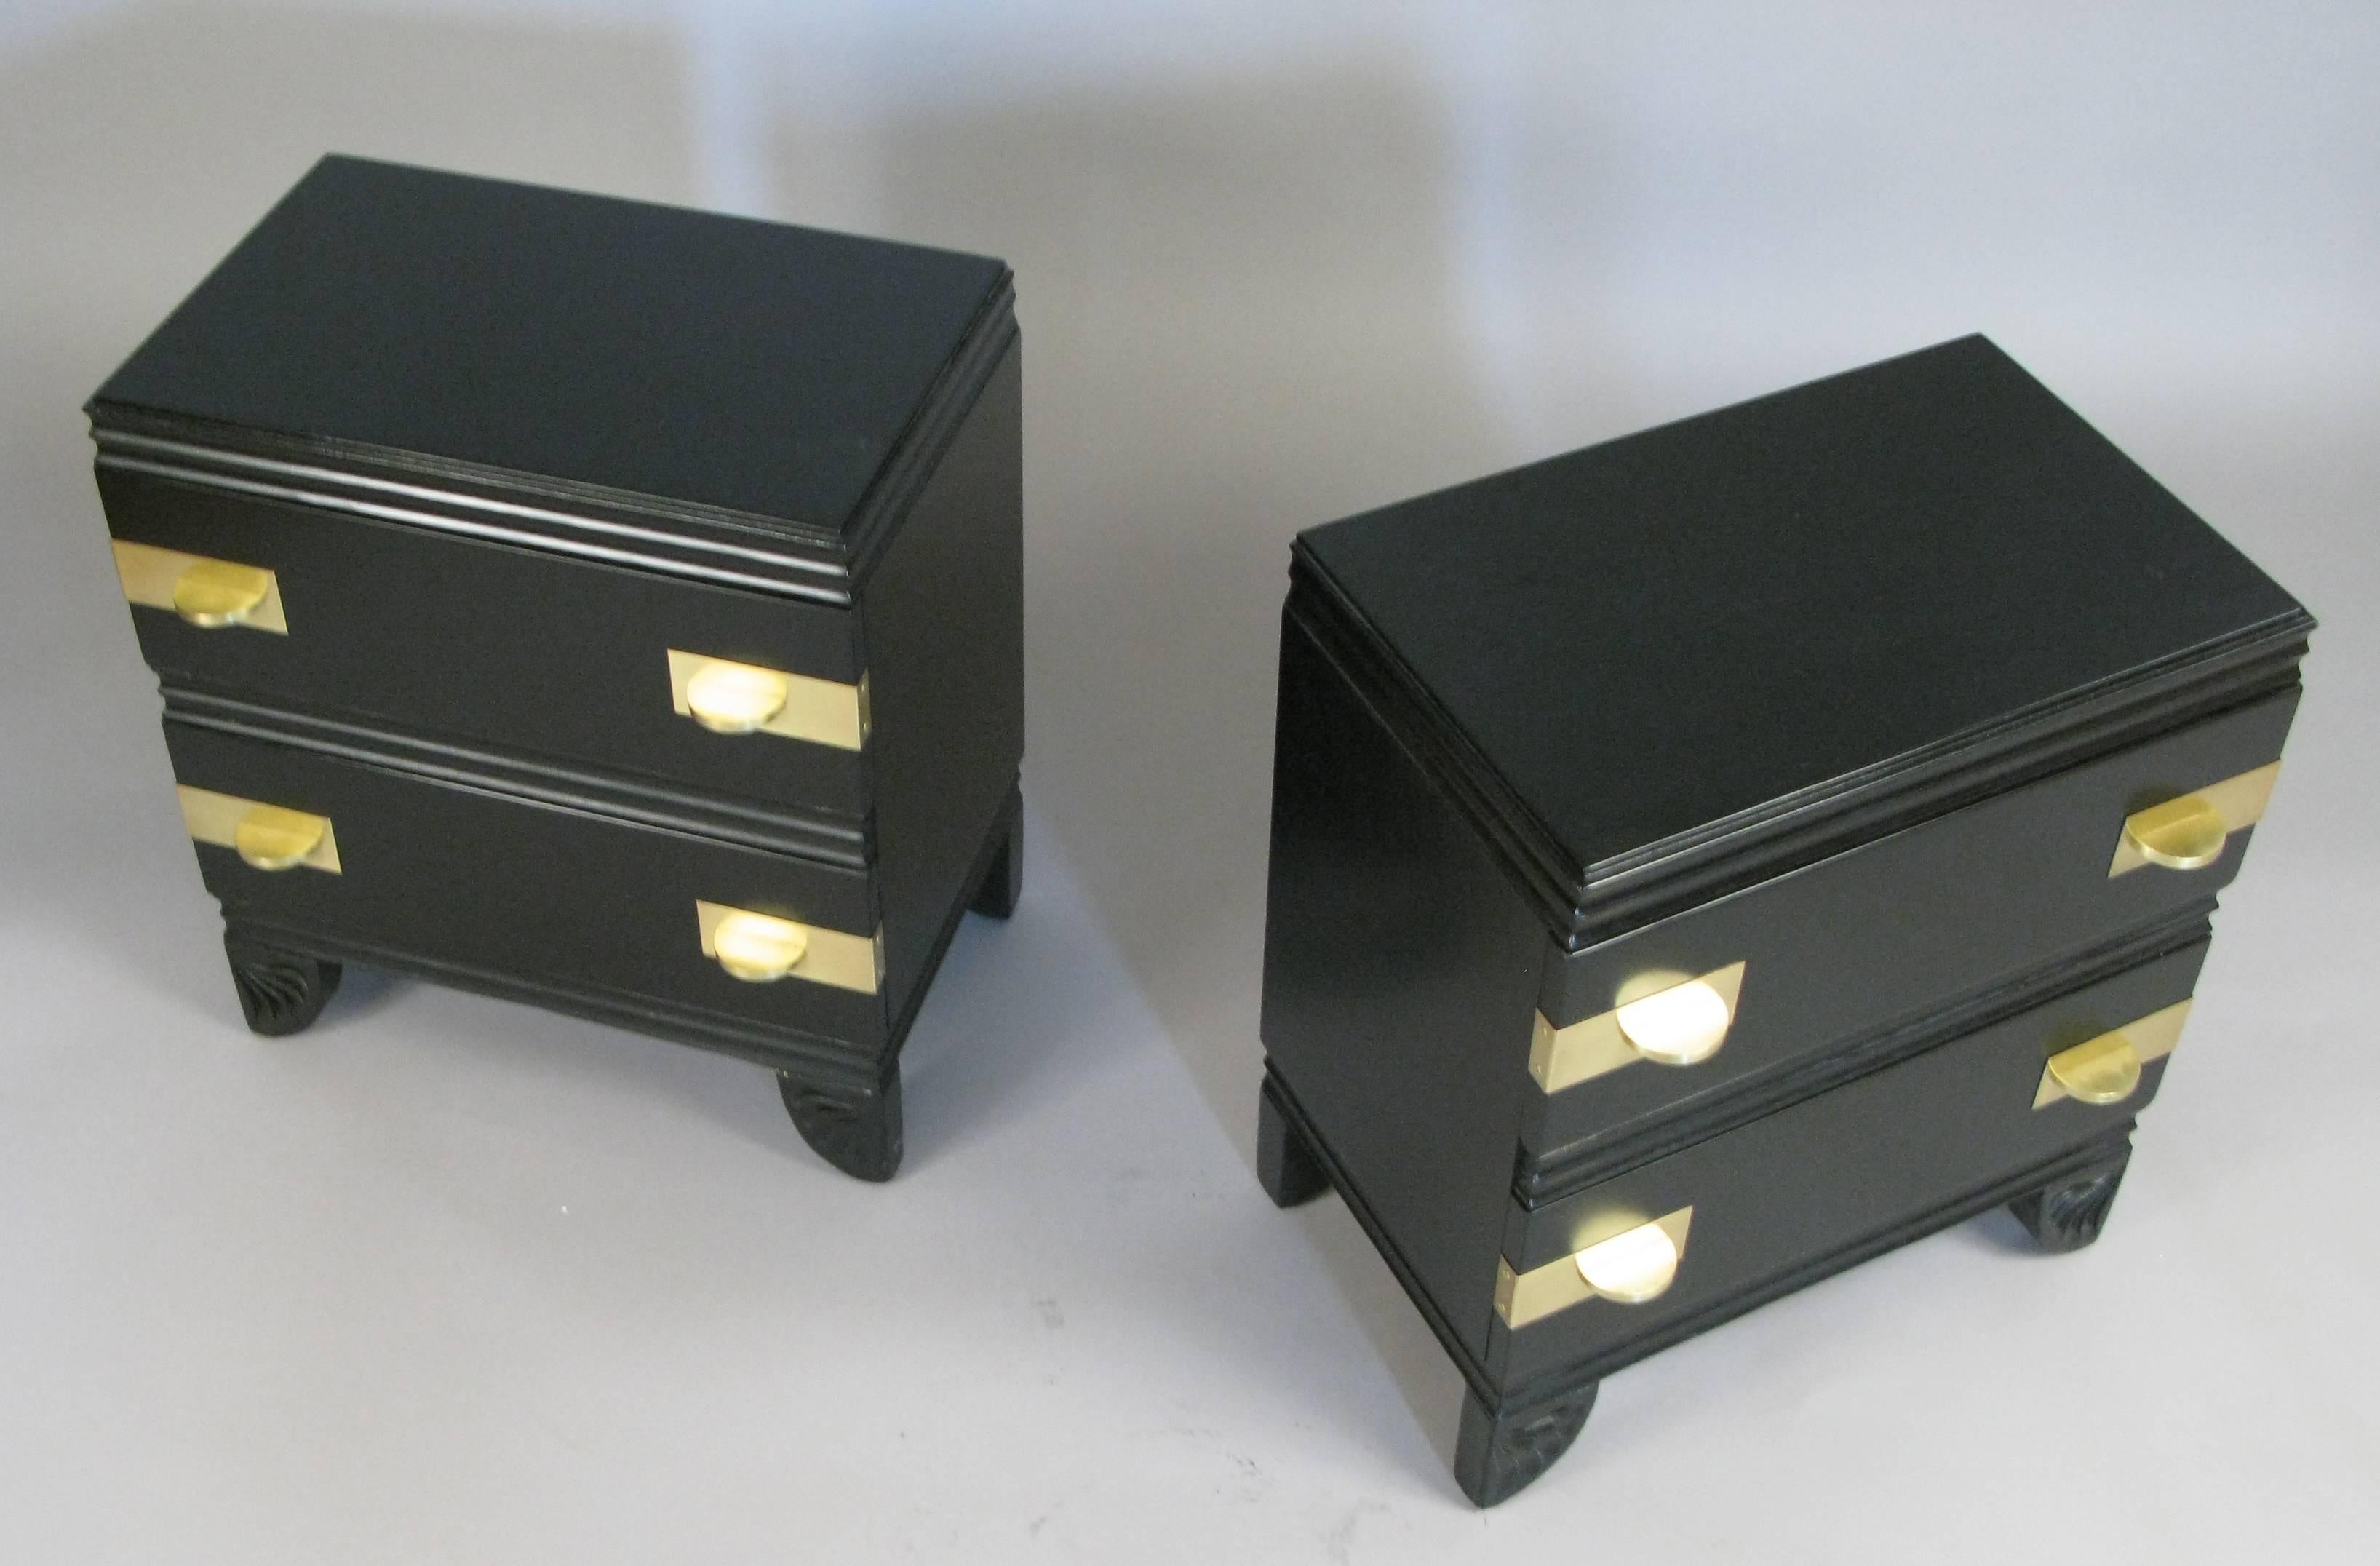 A pair of two-drawer 1950s nightstands in black lacquer with amazing large polished brass hardware and carved fluted feet. Beautiful details!